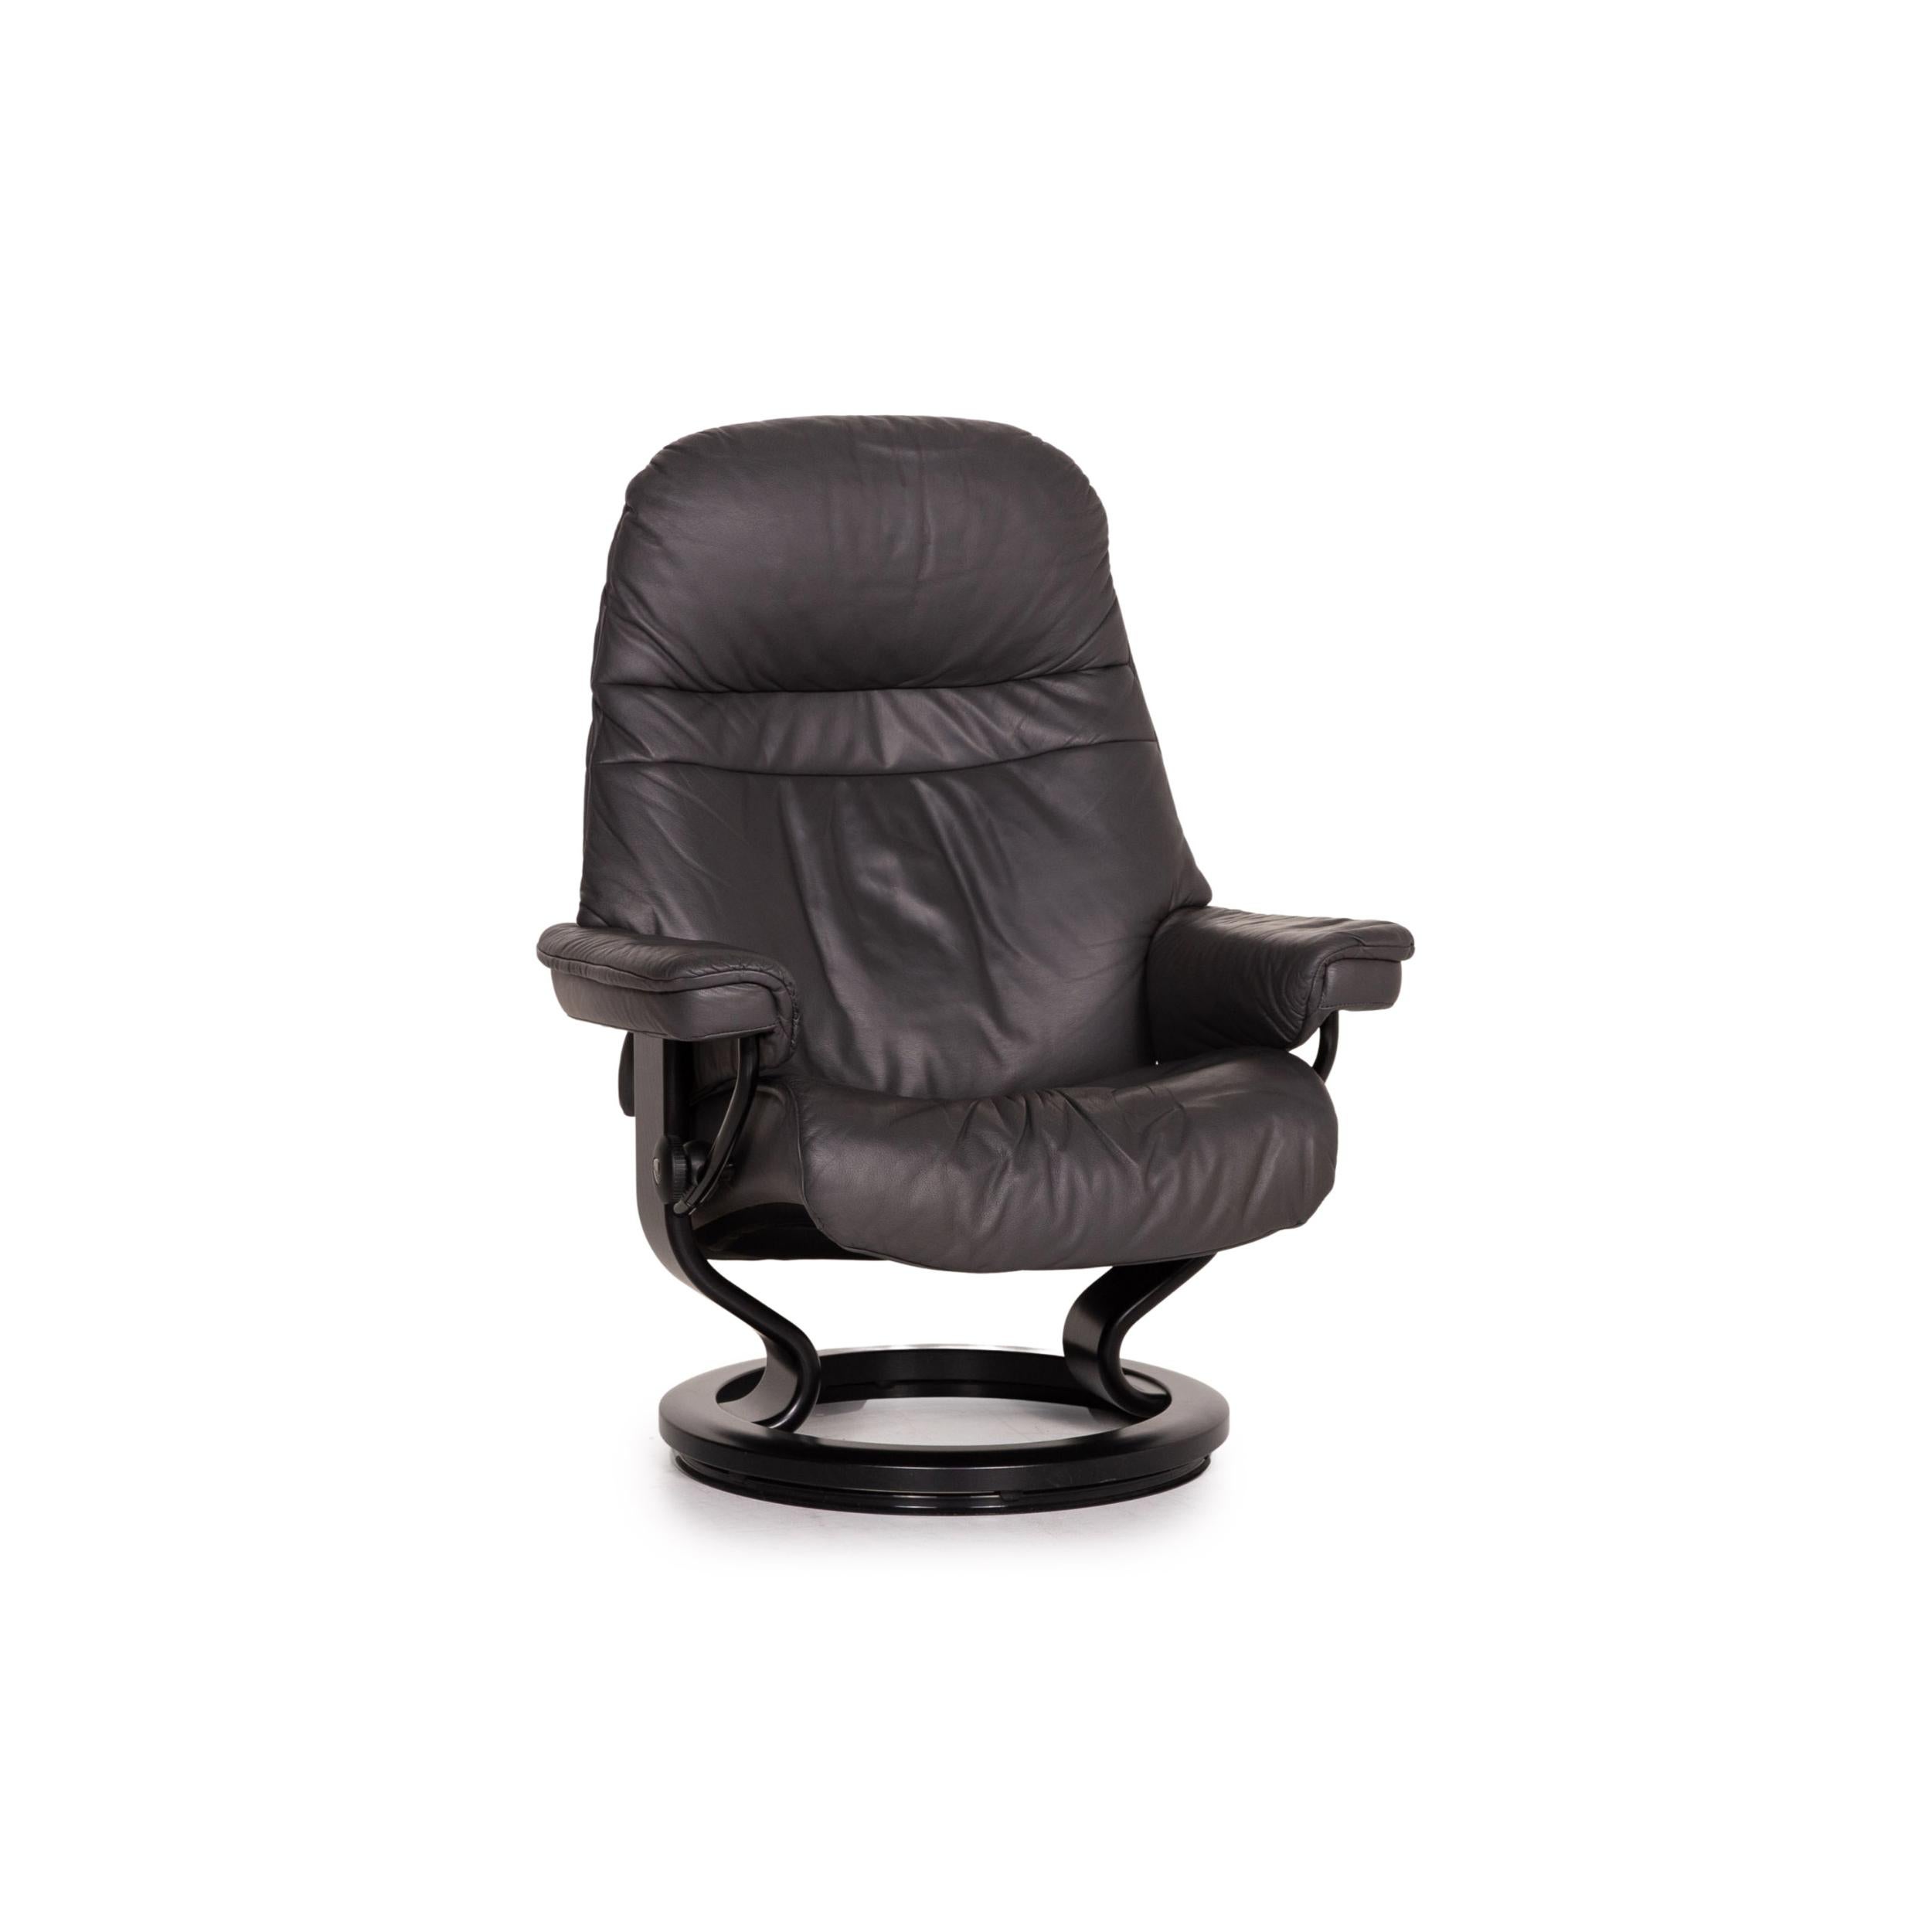 Stressless Sunrise Leather Armchair Incl. Ottoman Gray Size M Relax Function 4